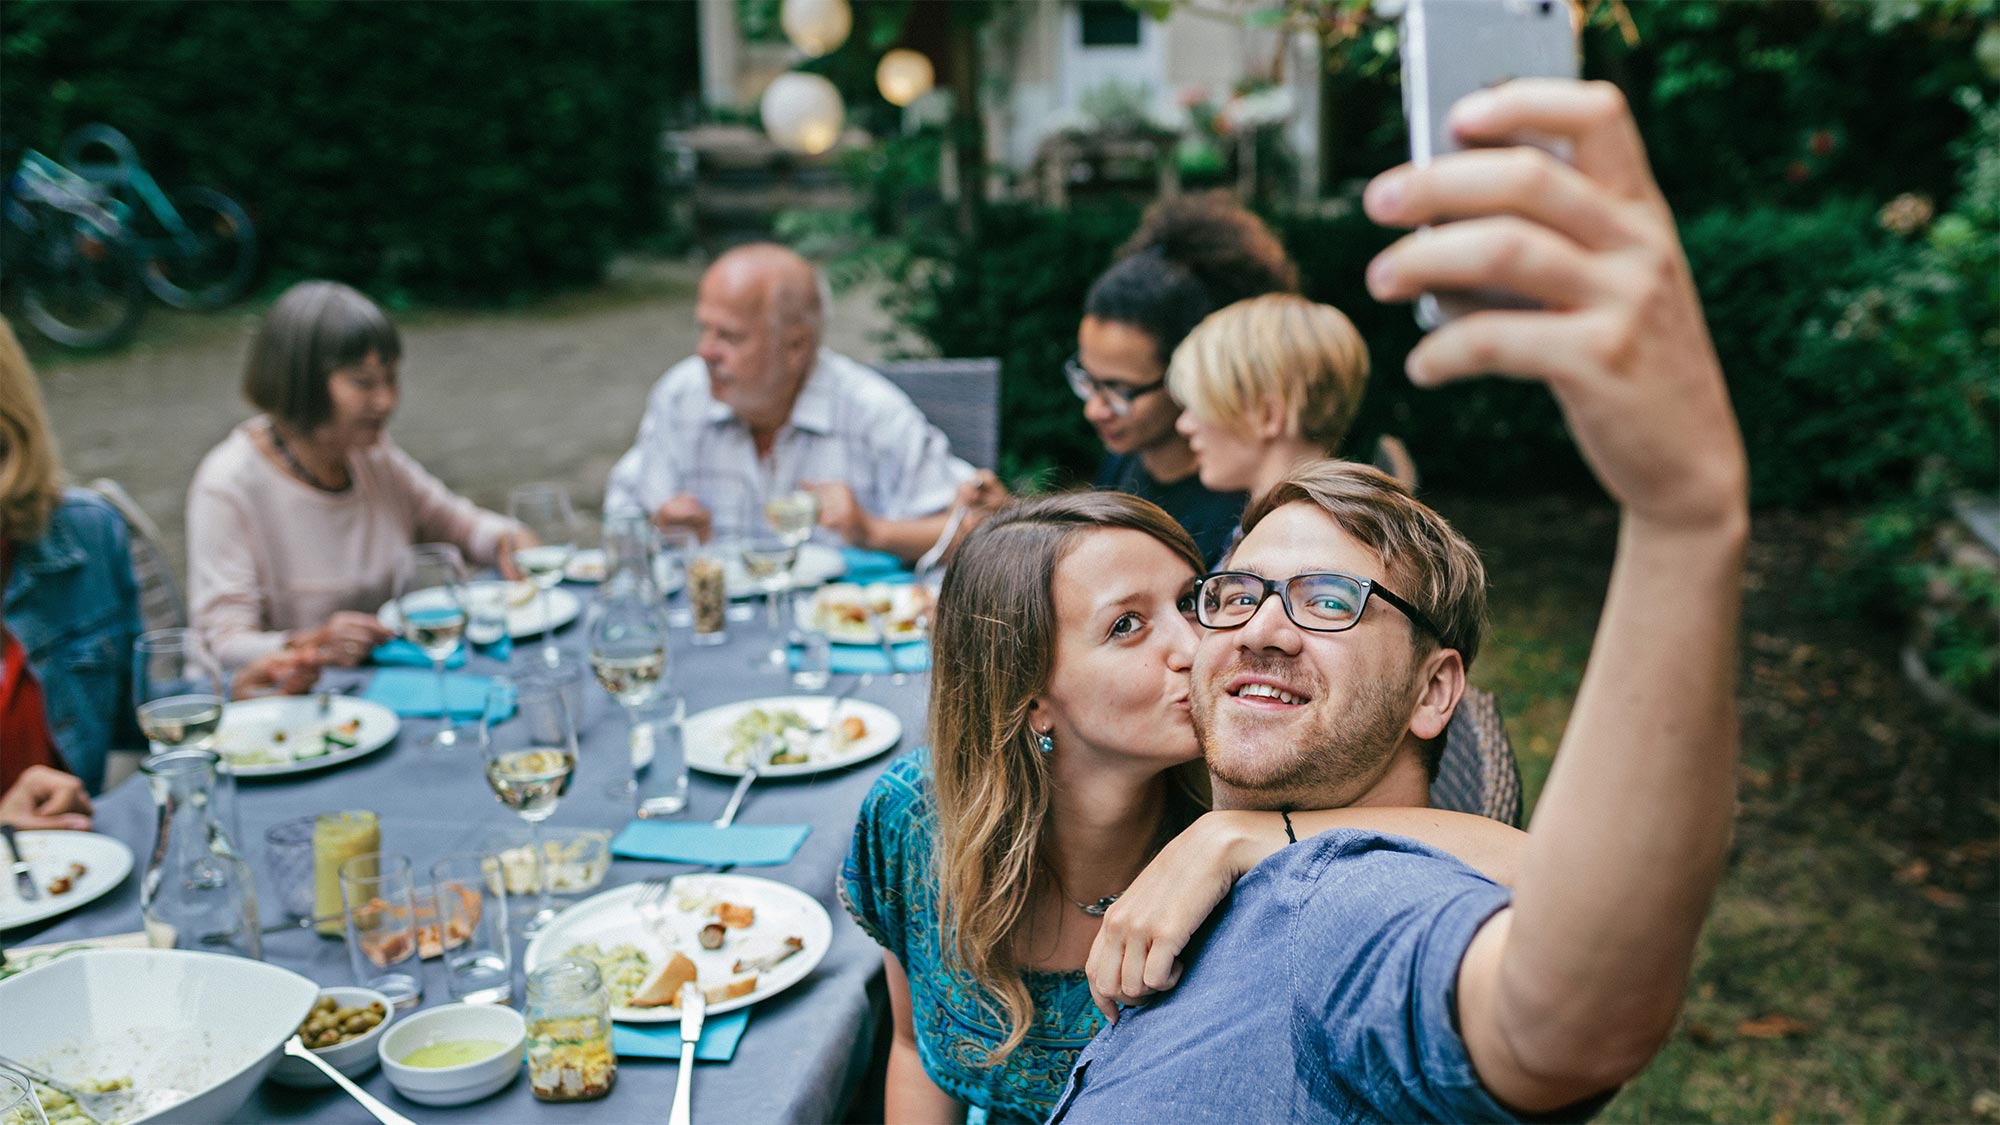 A man is sitting at a festive outdoor table taking a selfie while a woman is kissing him on the cheek. Private moments and messages remain private even with and thanks to 5G. 